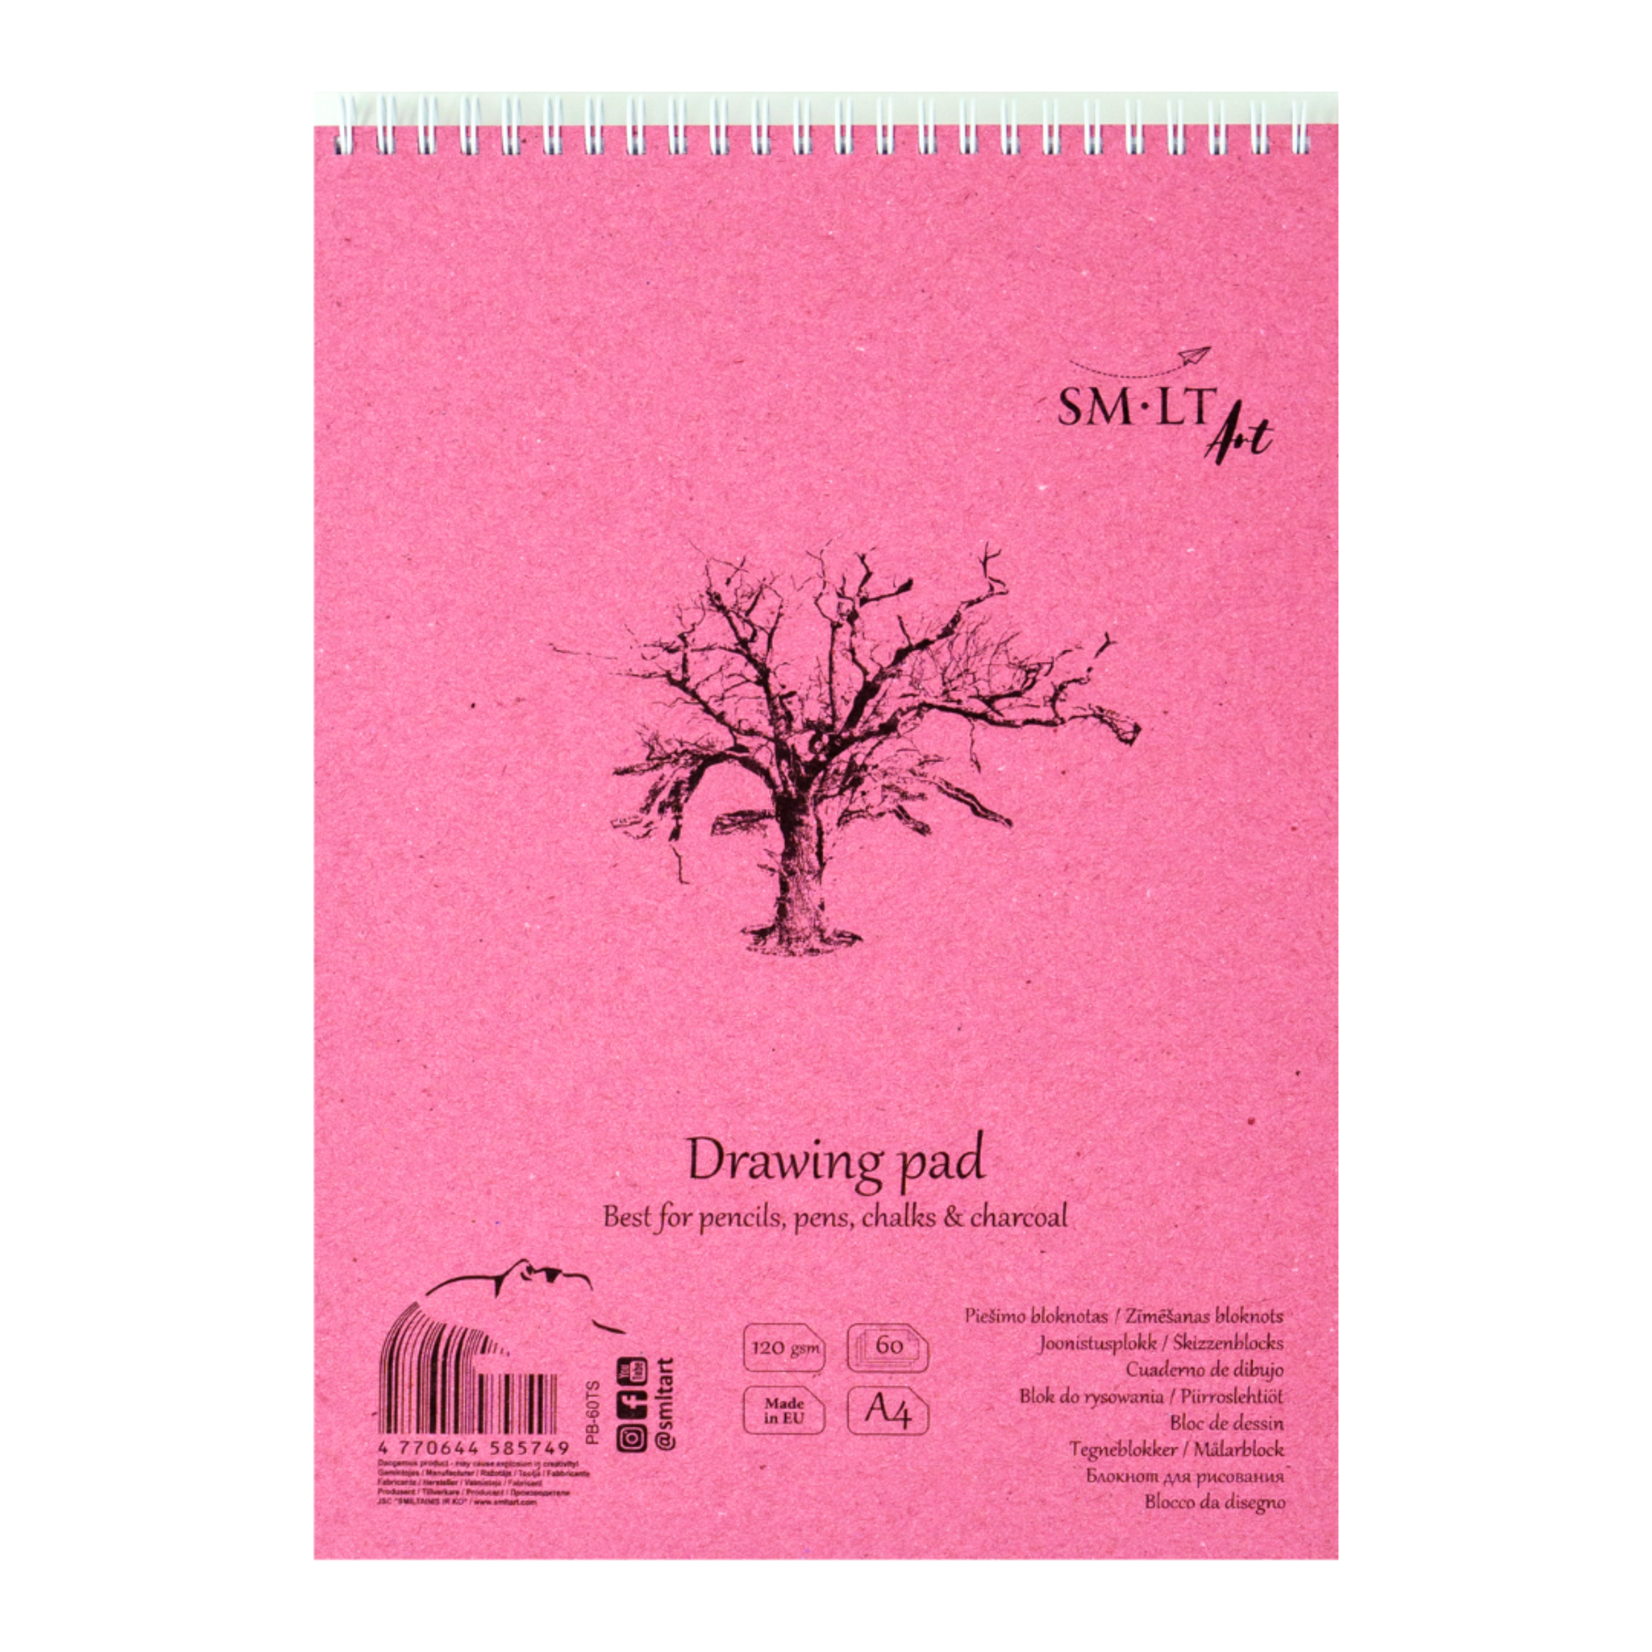 SM-LT ART AUTHENTIC DRAWING PAD COIL BOUND A4 8.5X11.75 WHITE